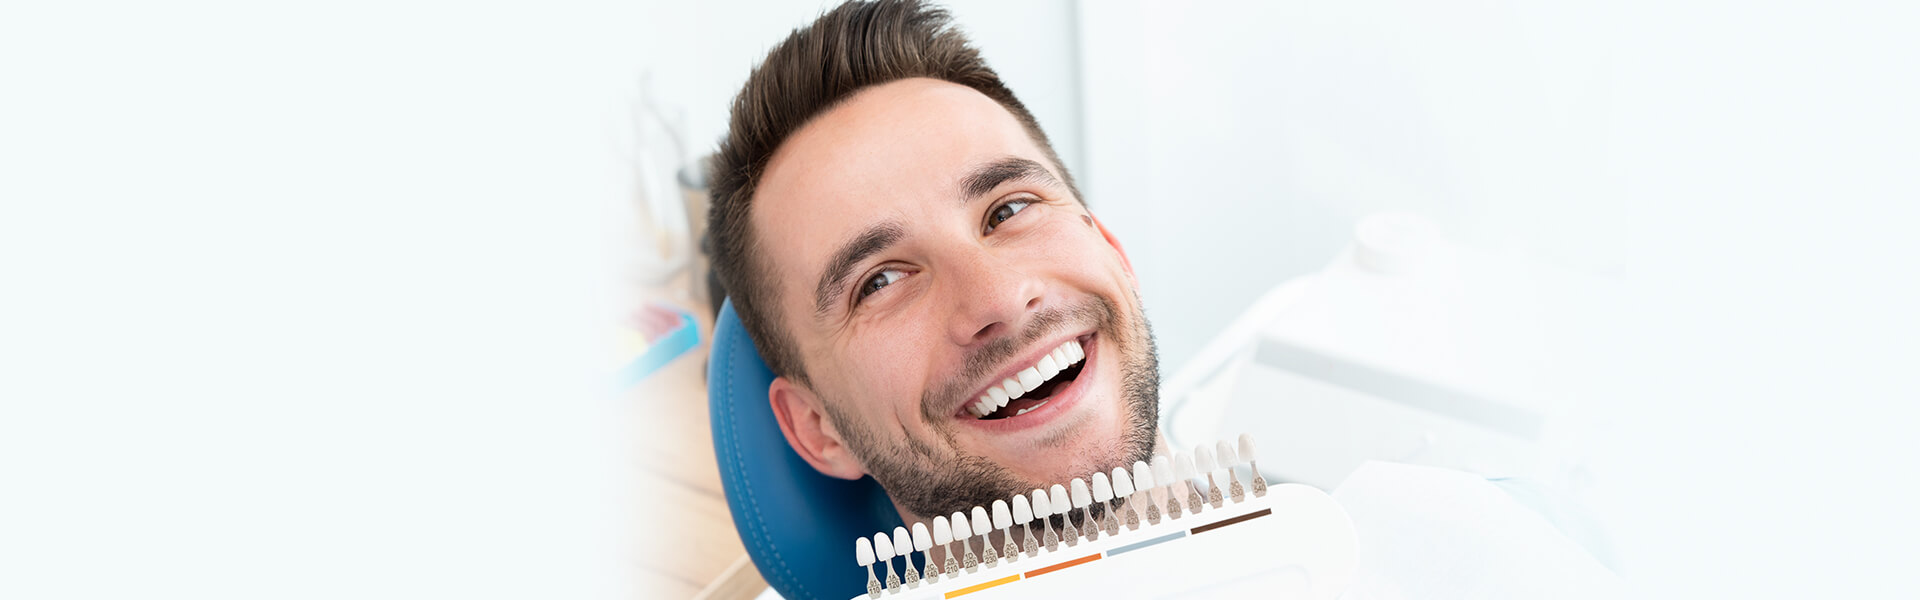 Do You Think Your Teeth Need Cosmetic Improvements to Look Better? Consider Dental Veneers